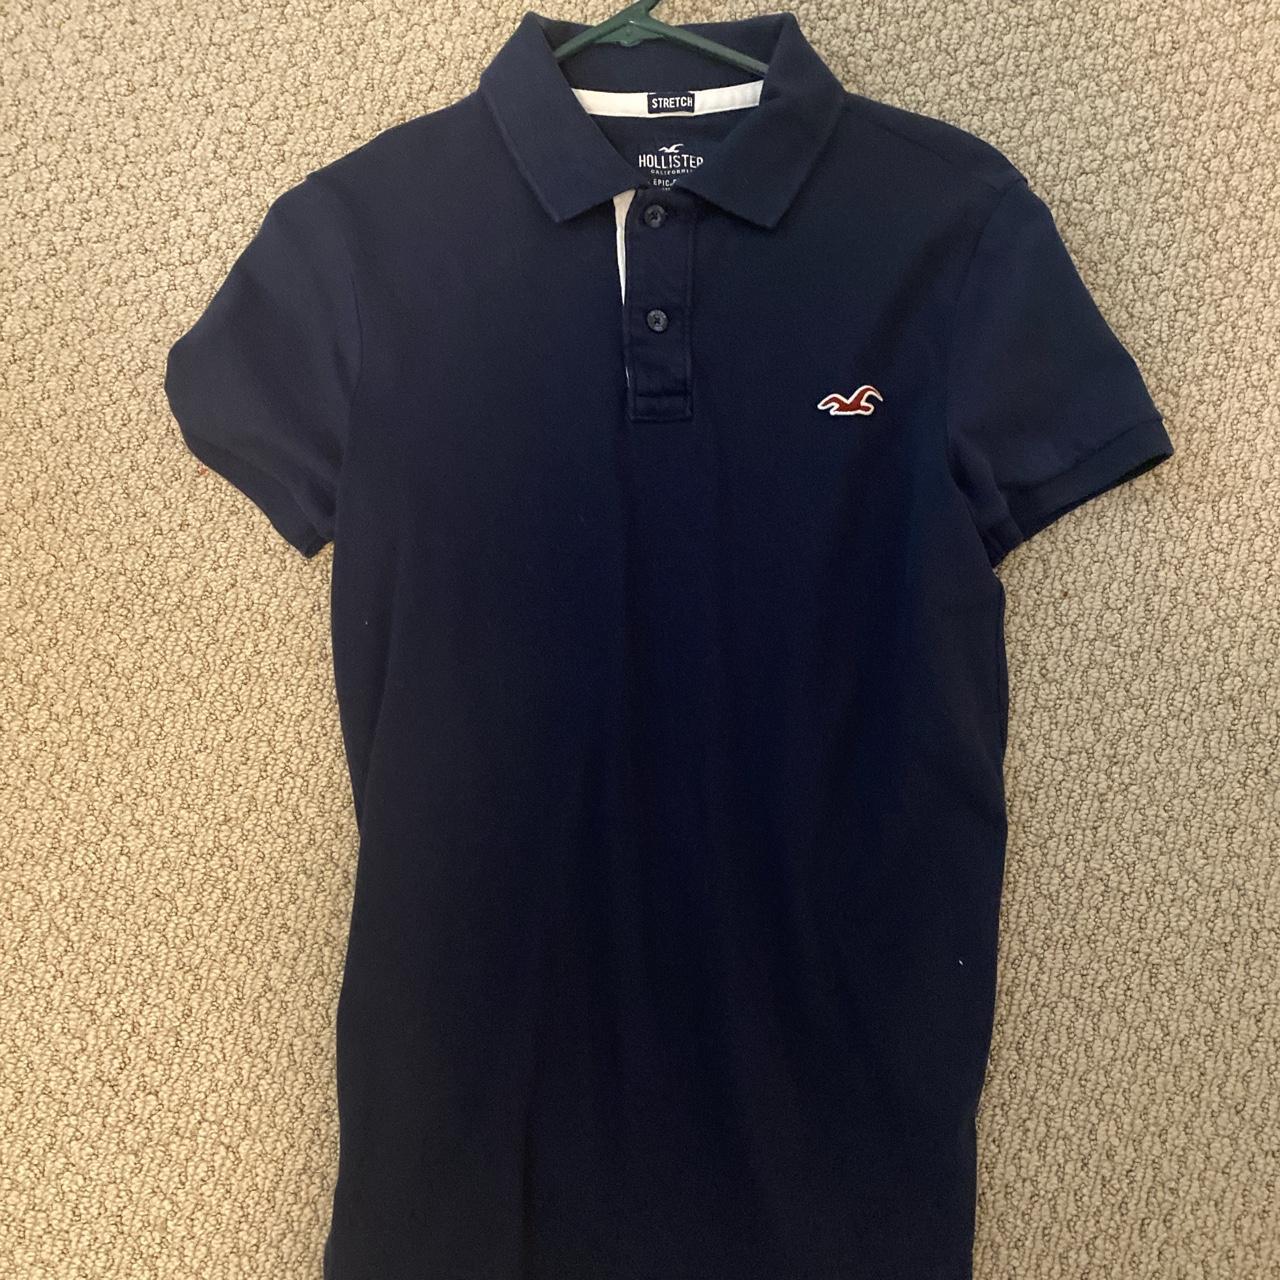 Good condition Hollister stretch polo with logo on - Depop